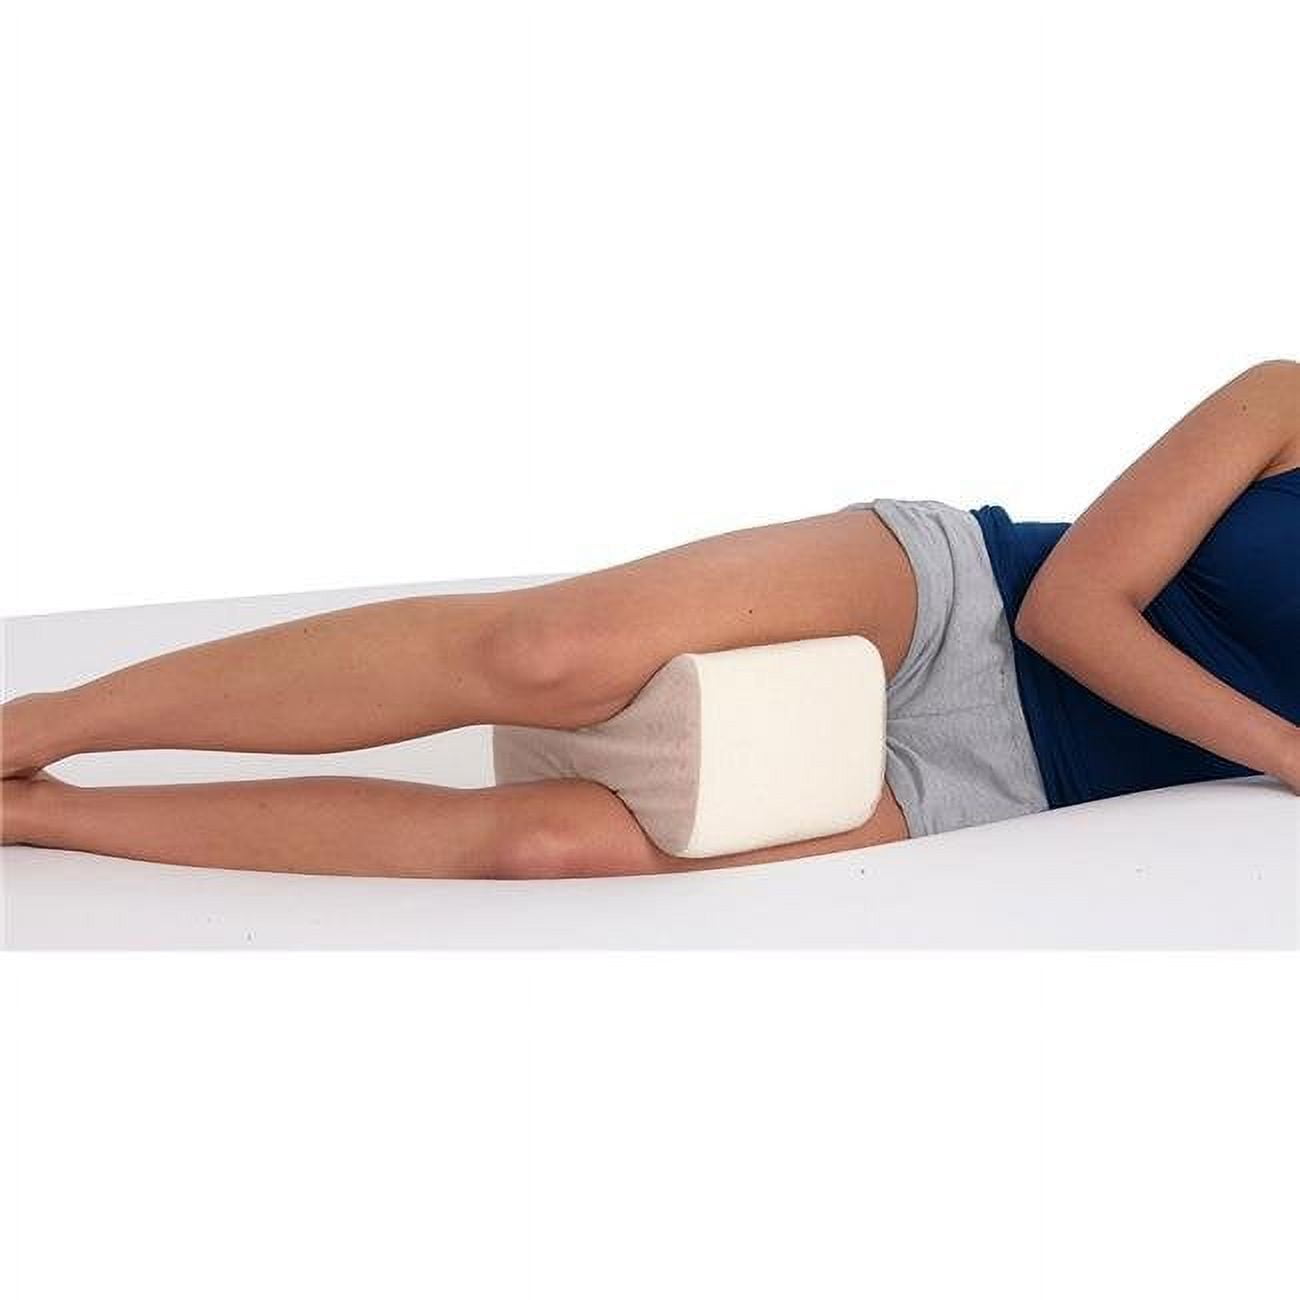 OasisSpace Leg Support Pillow for Surgery, Swelling, Injury or Rest -  Memory Foam Pillows for Knee, Ankle and Foot - Improve Circulation?unisex?  